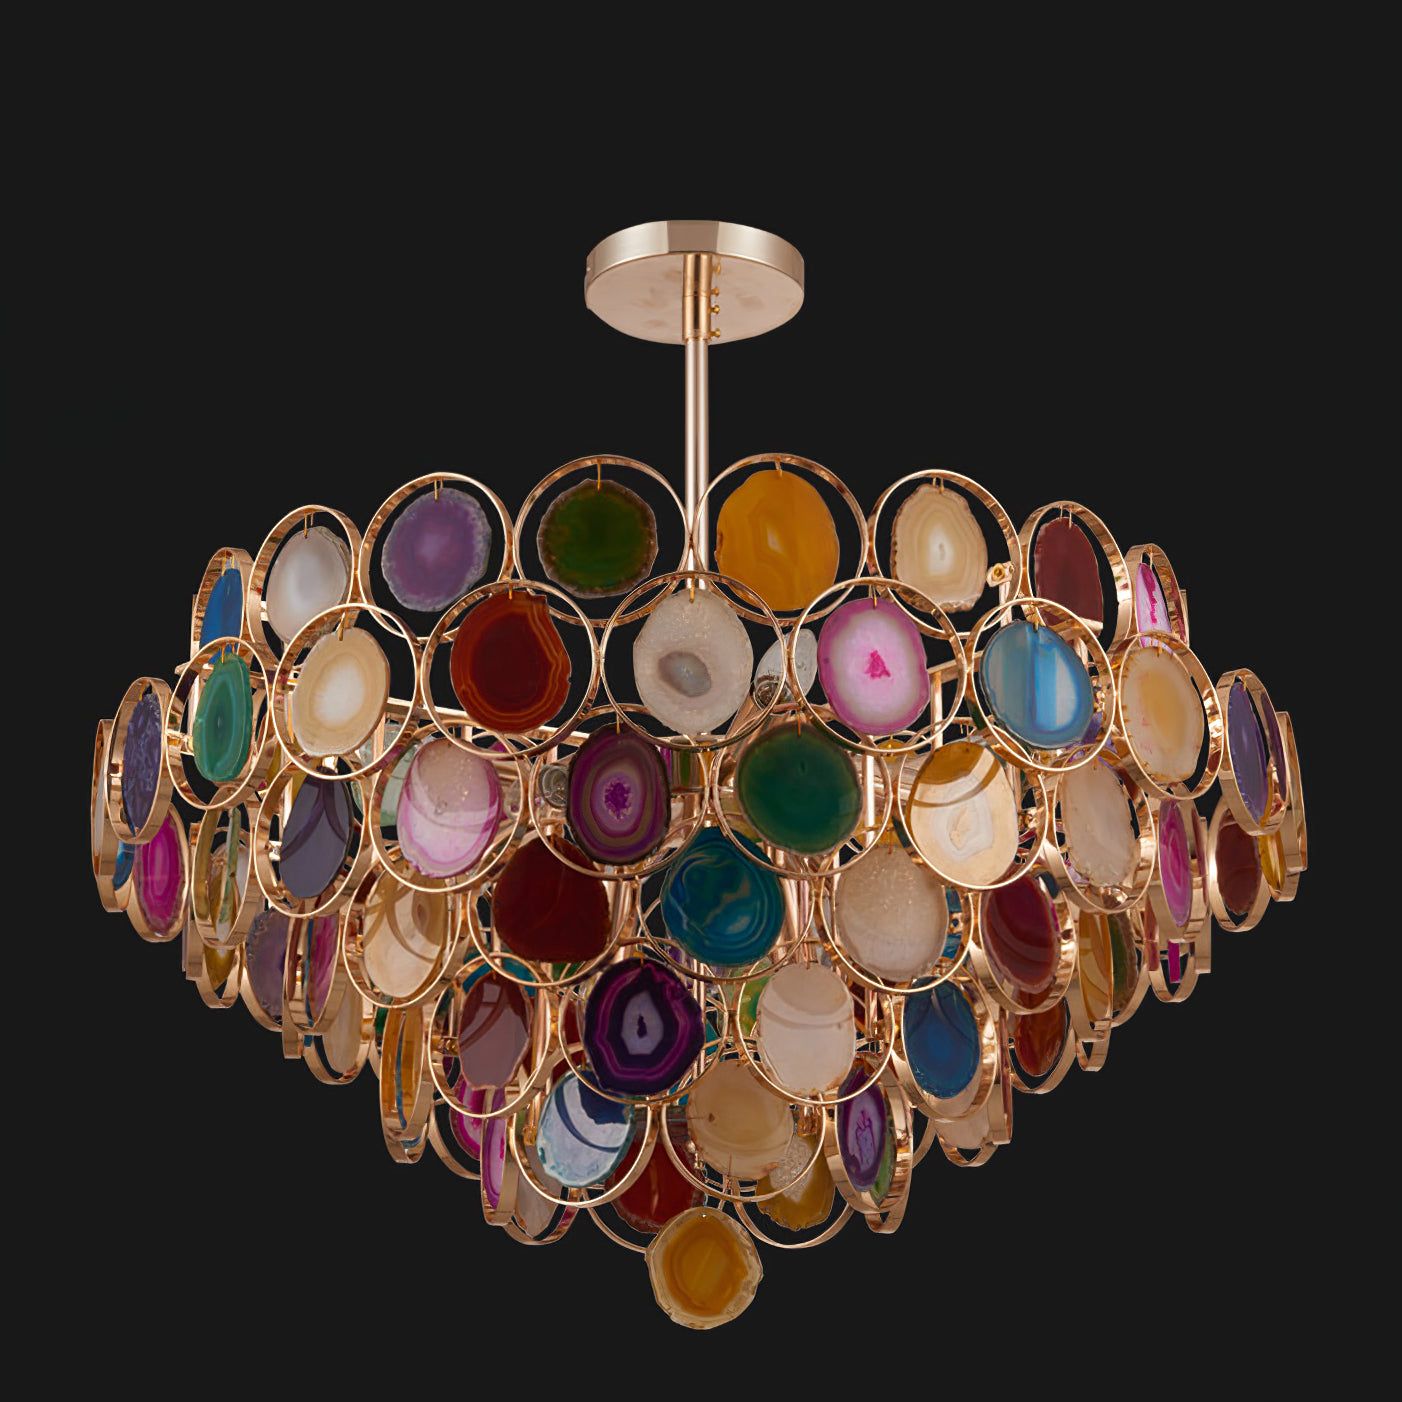 3 Chandelier “3 Stunning Chandelier Designs to Elevate Your Home Decor”